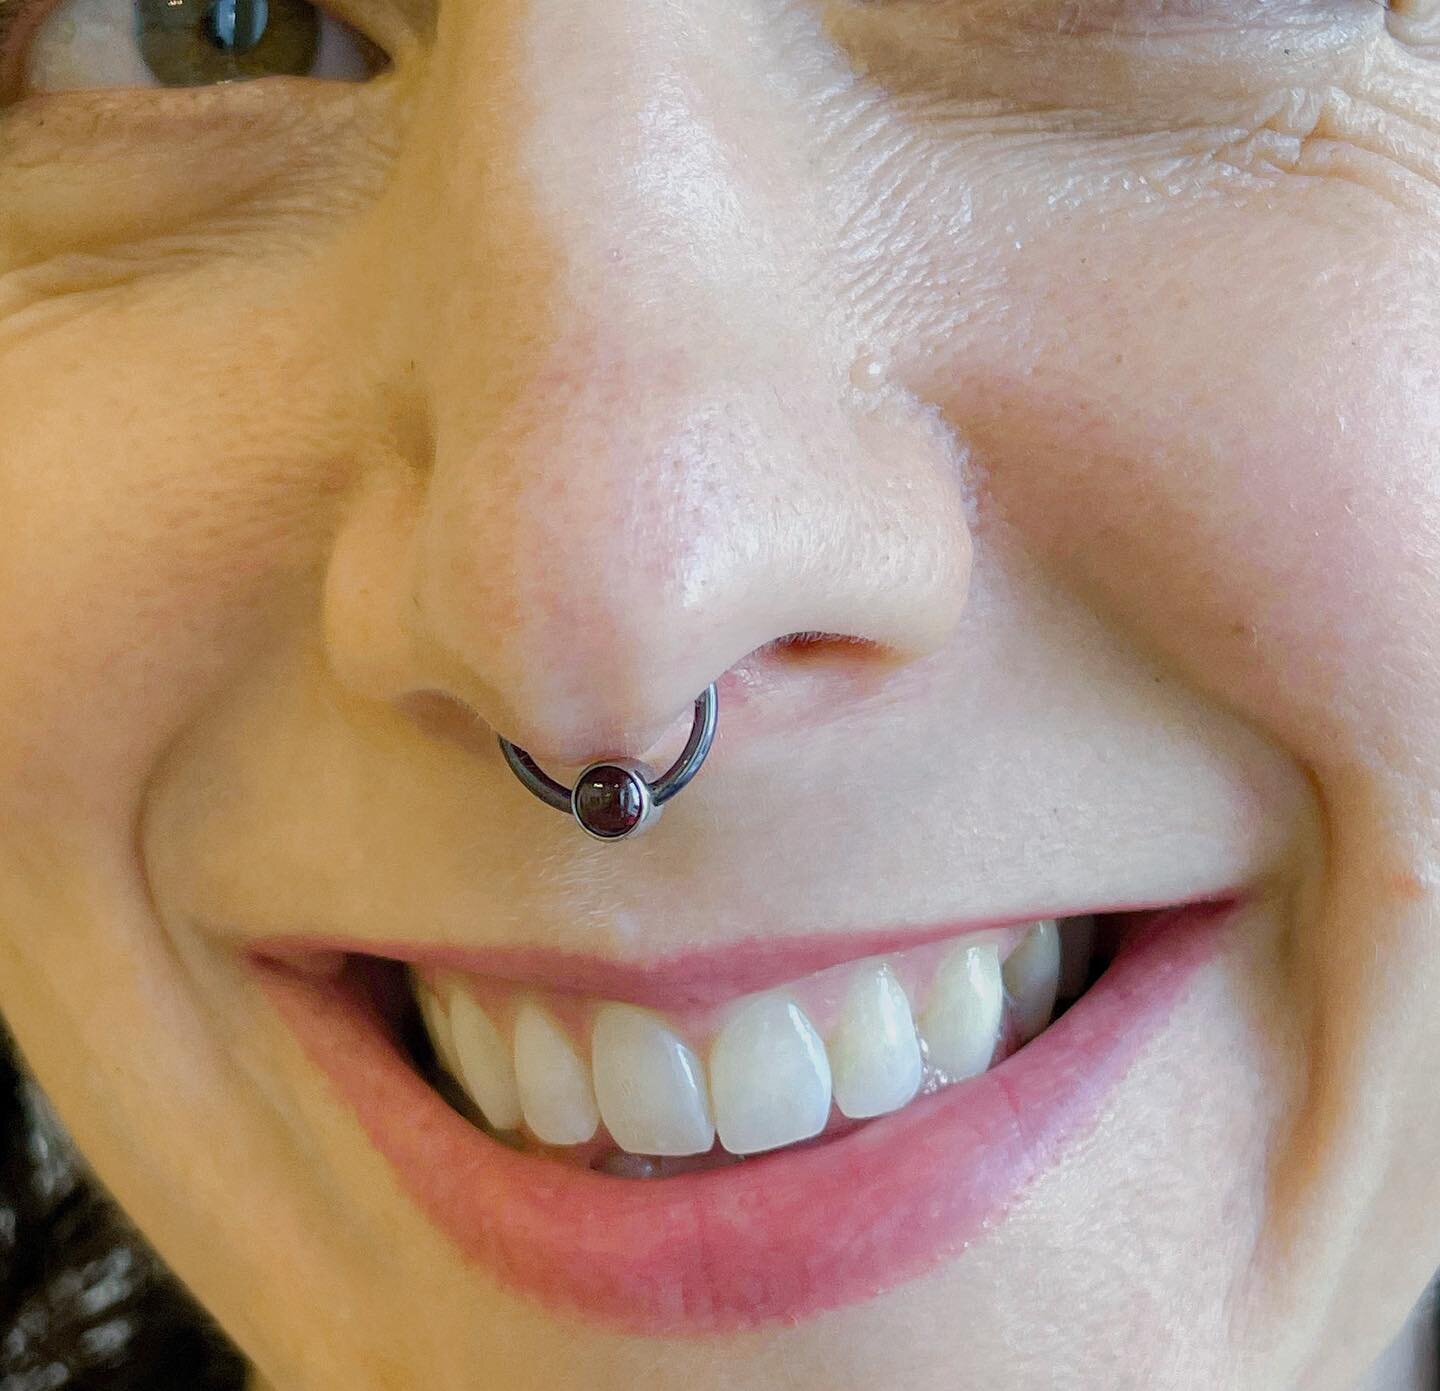 Katherine is very happy to help us announce that NOSE &amp; SEPTUM piercings and changes are back!!

‼️In order to get these piercings or changes you MUST provide proof of Covid vaccination OR a negative Covid test (test MUST be a PCR test that shows